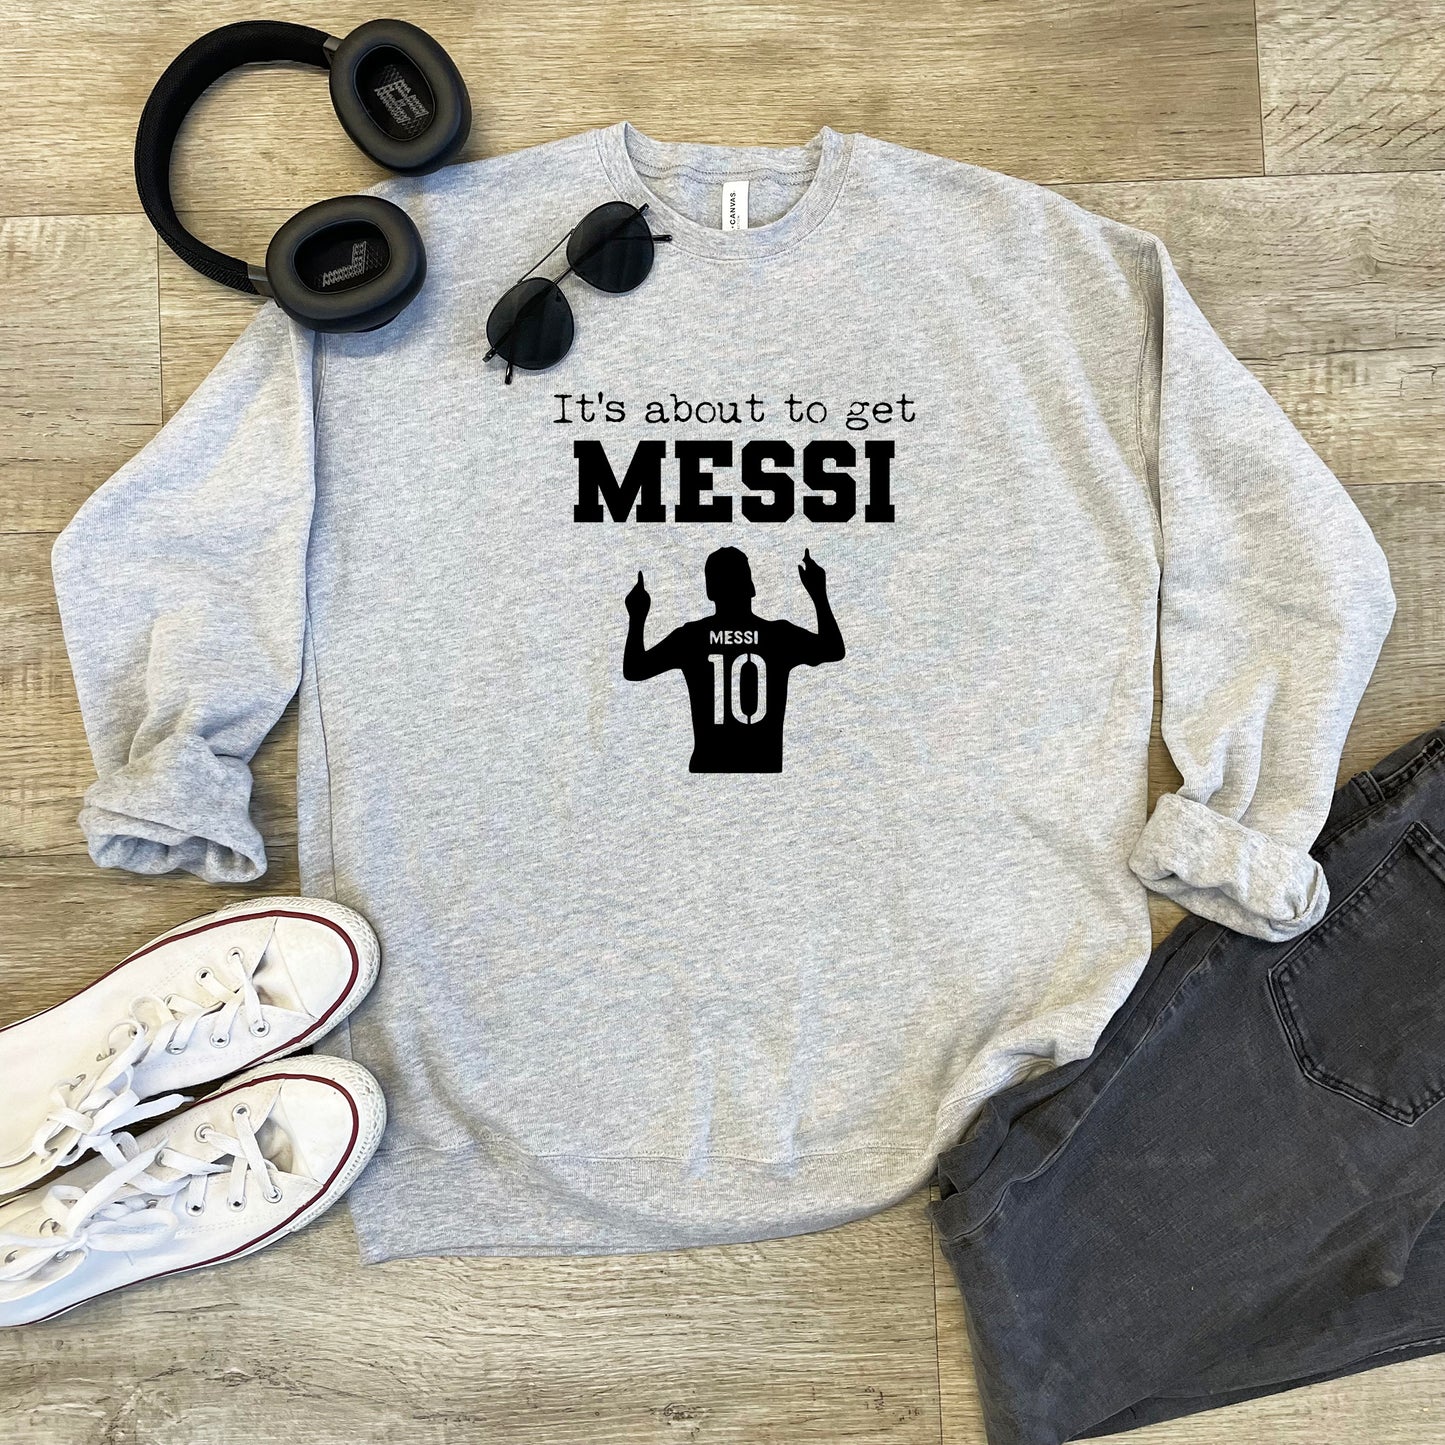 It's About To Get Messi (Soccer) - Unisex Sweatshirt - Heather Gray or Dusty Blue